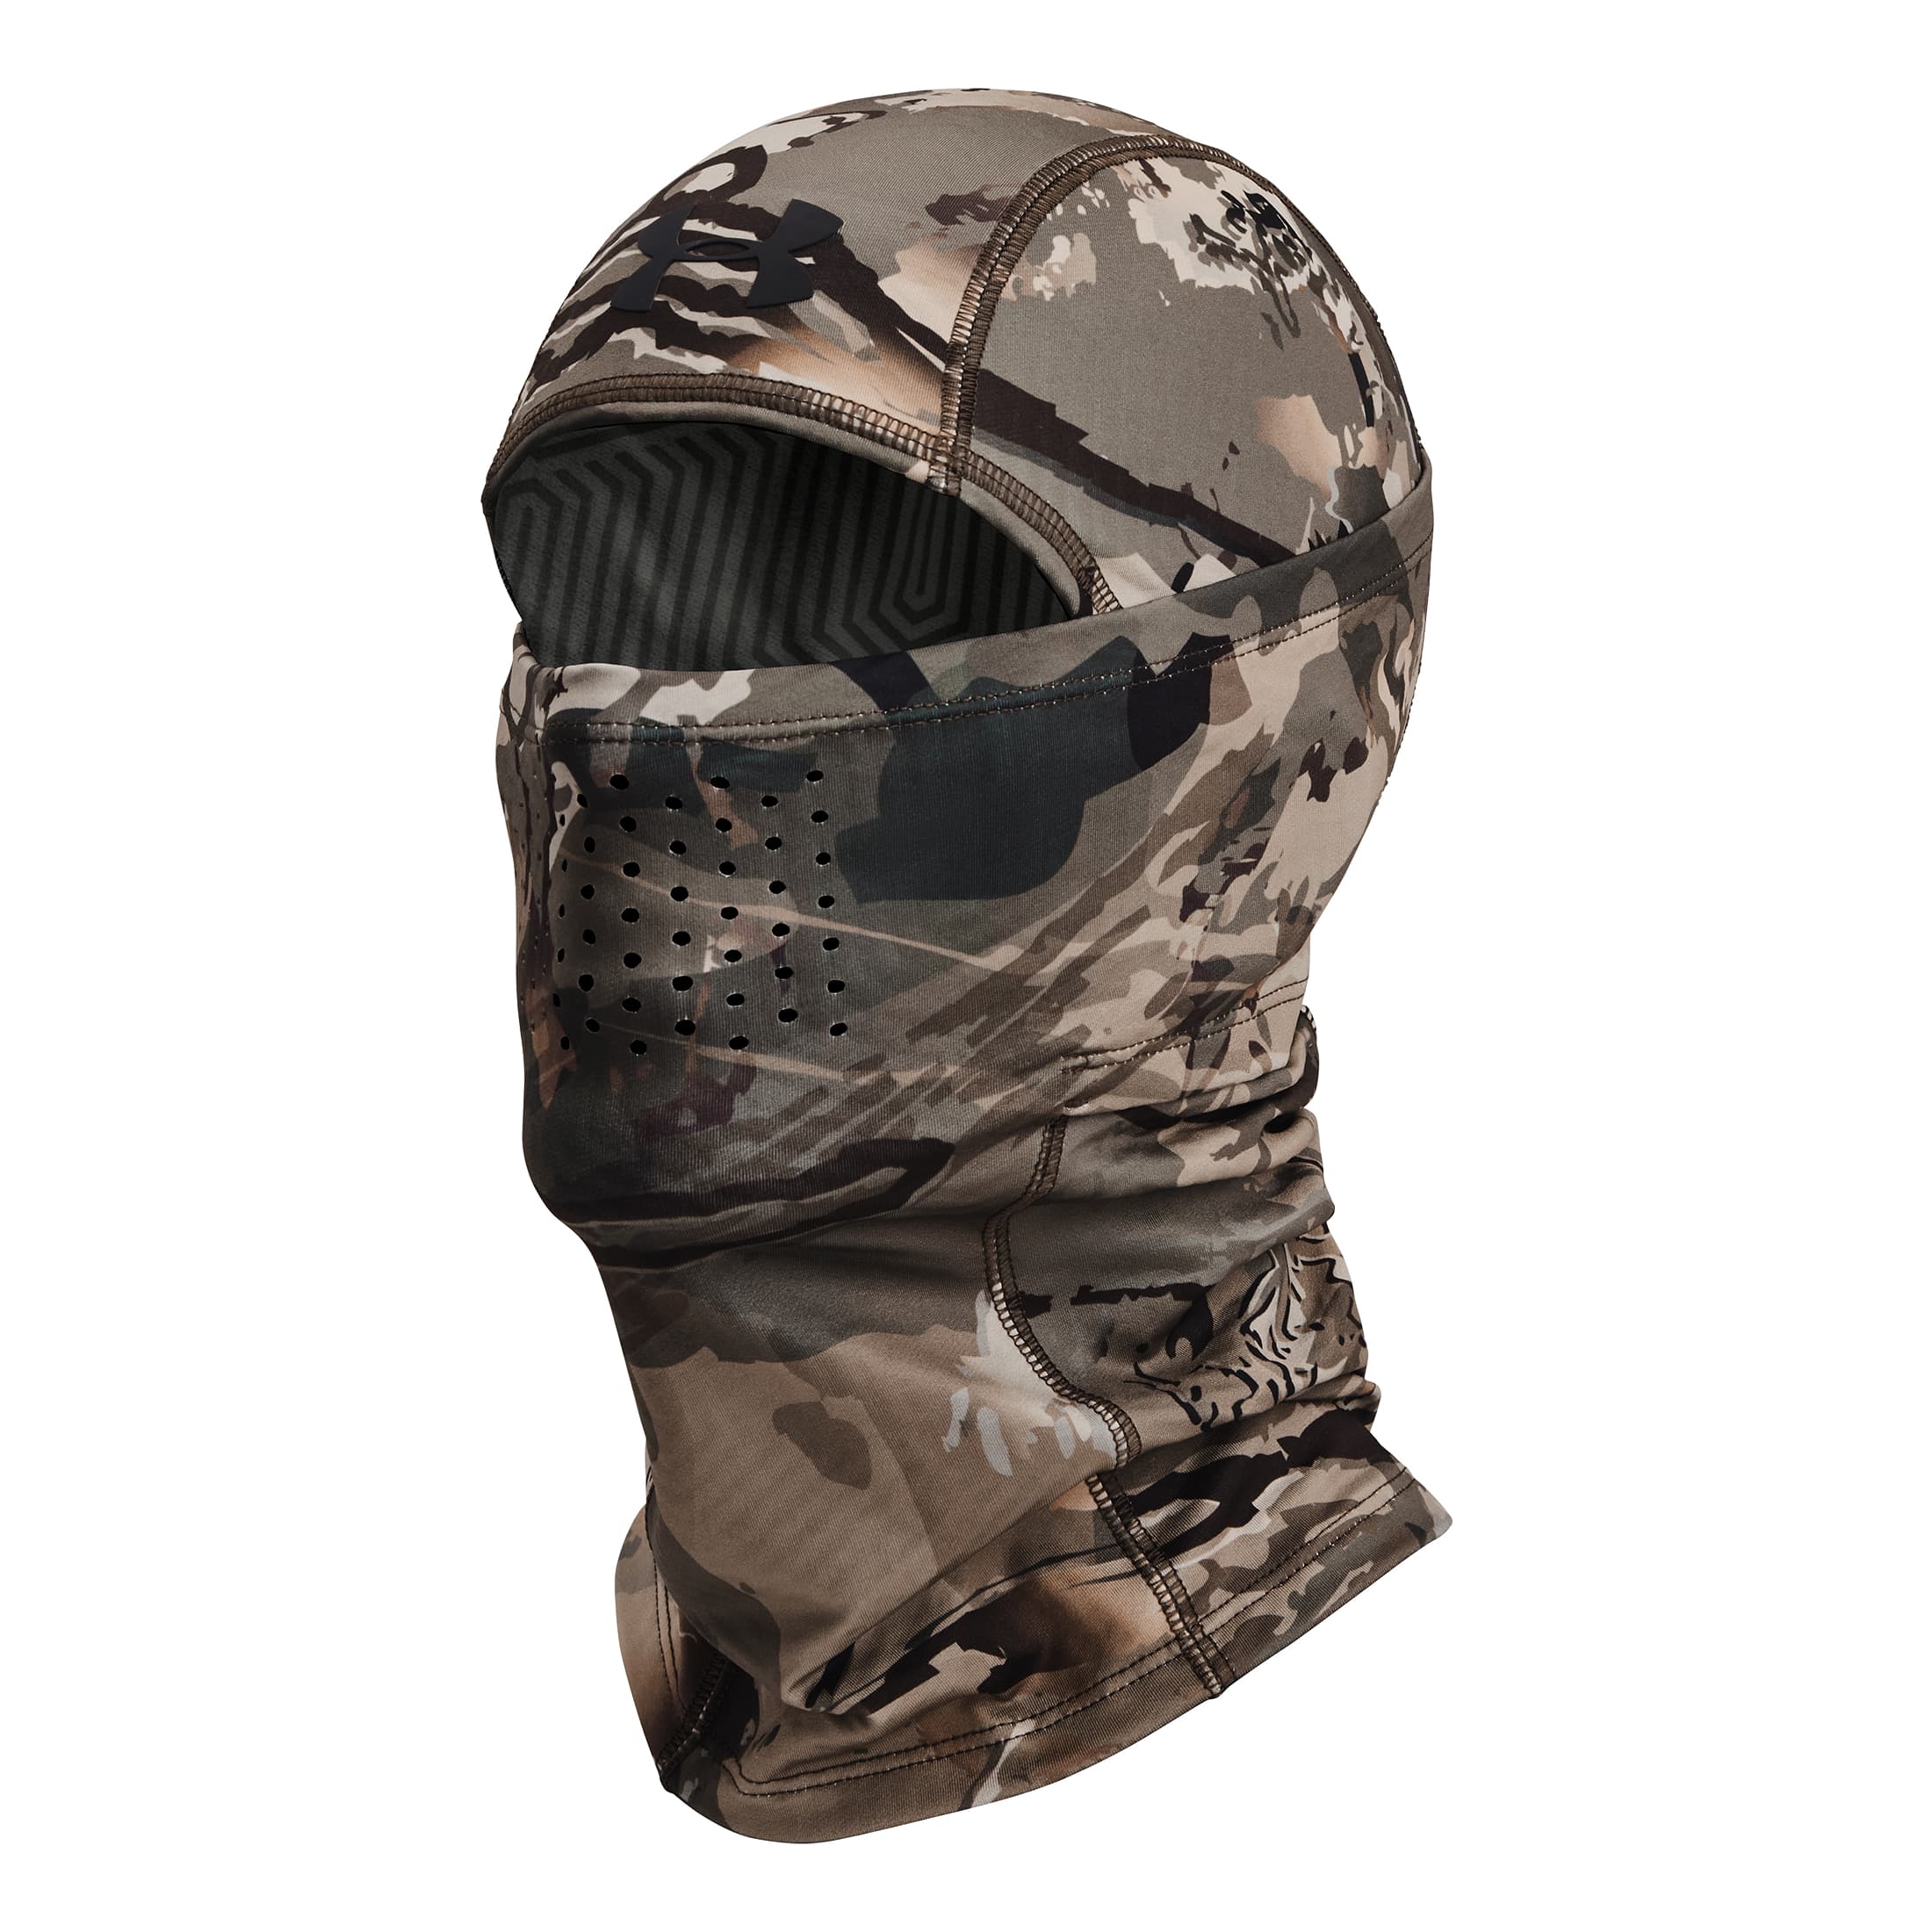 Under Armour® Men’s ColdGear INFRARED® Scent Control Hood - Forest Camo/Black